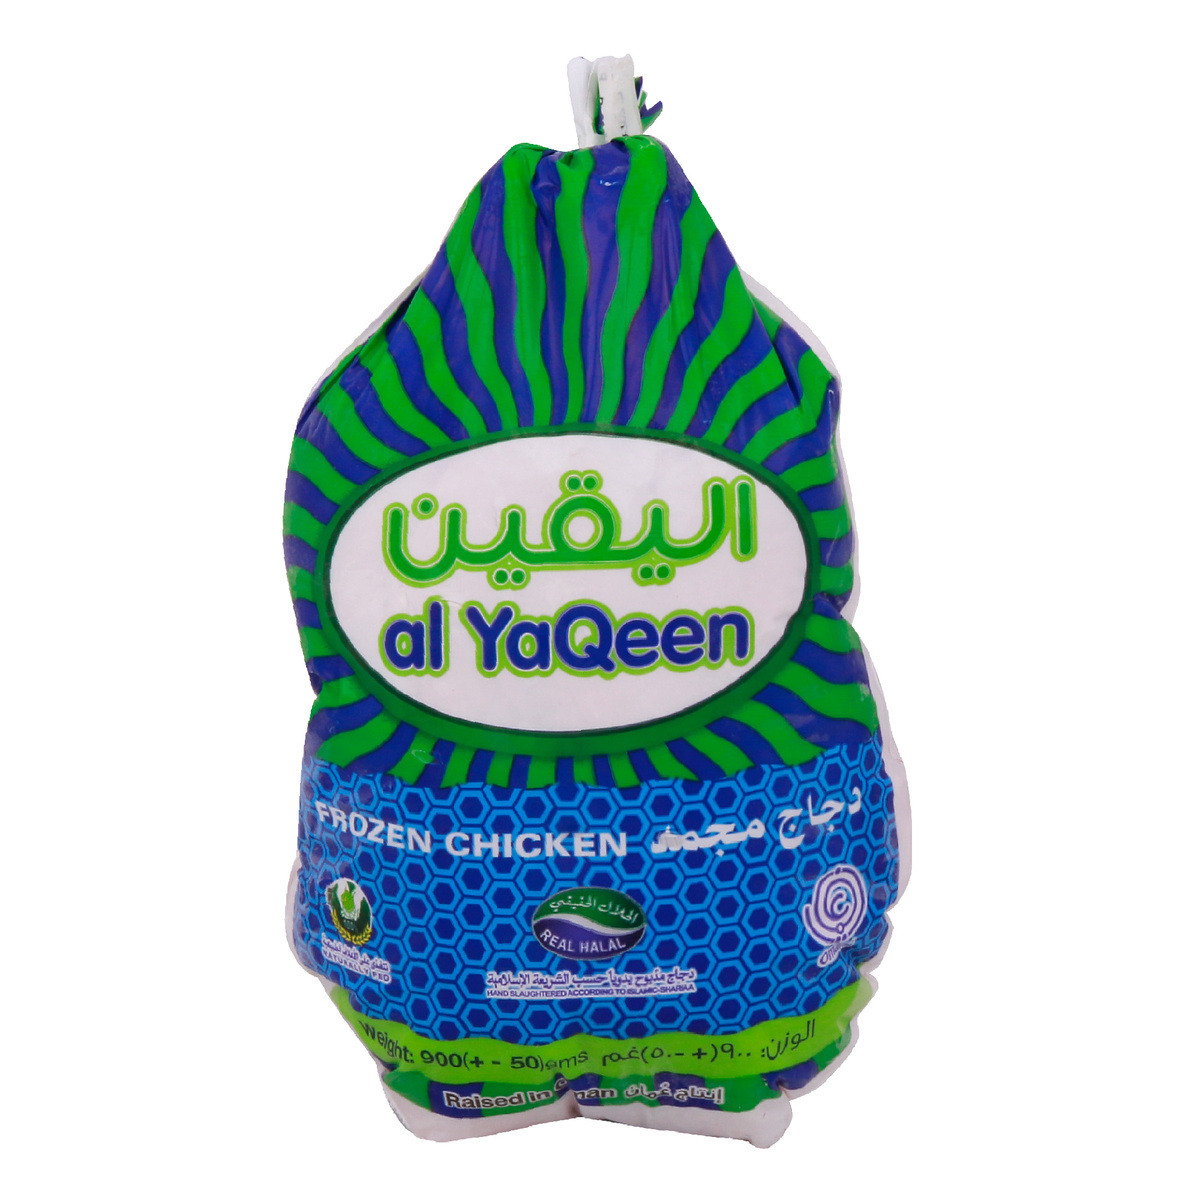 Al Yaqeen Whole Chicken 10 x 900g